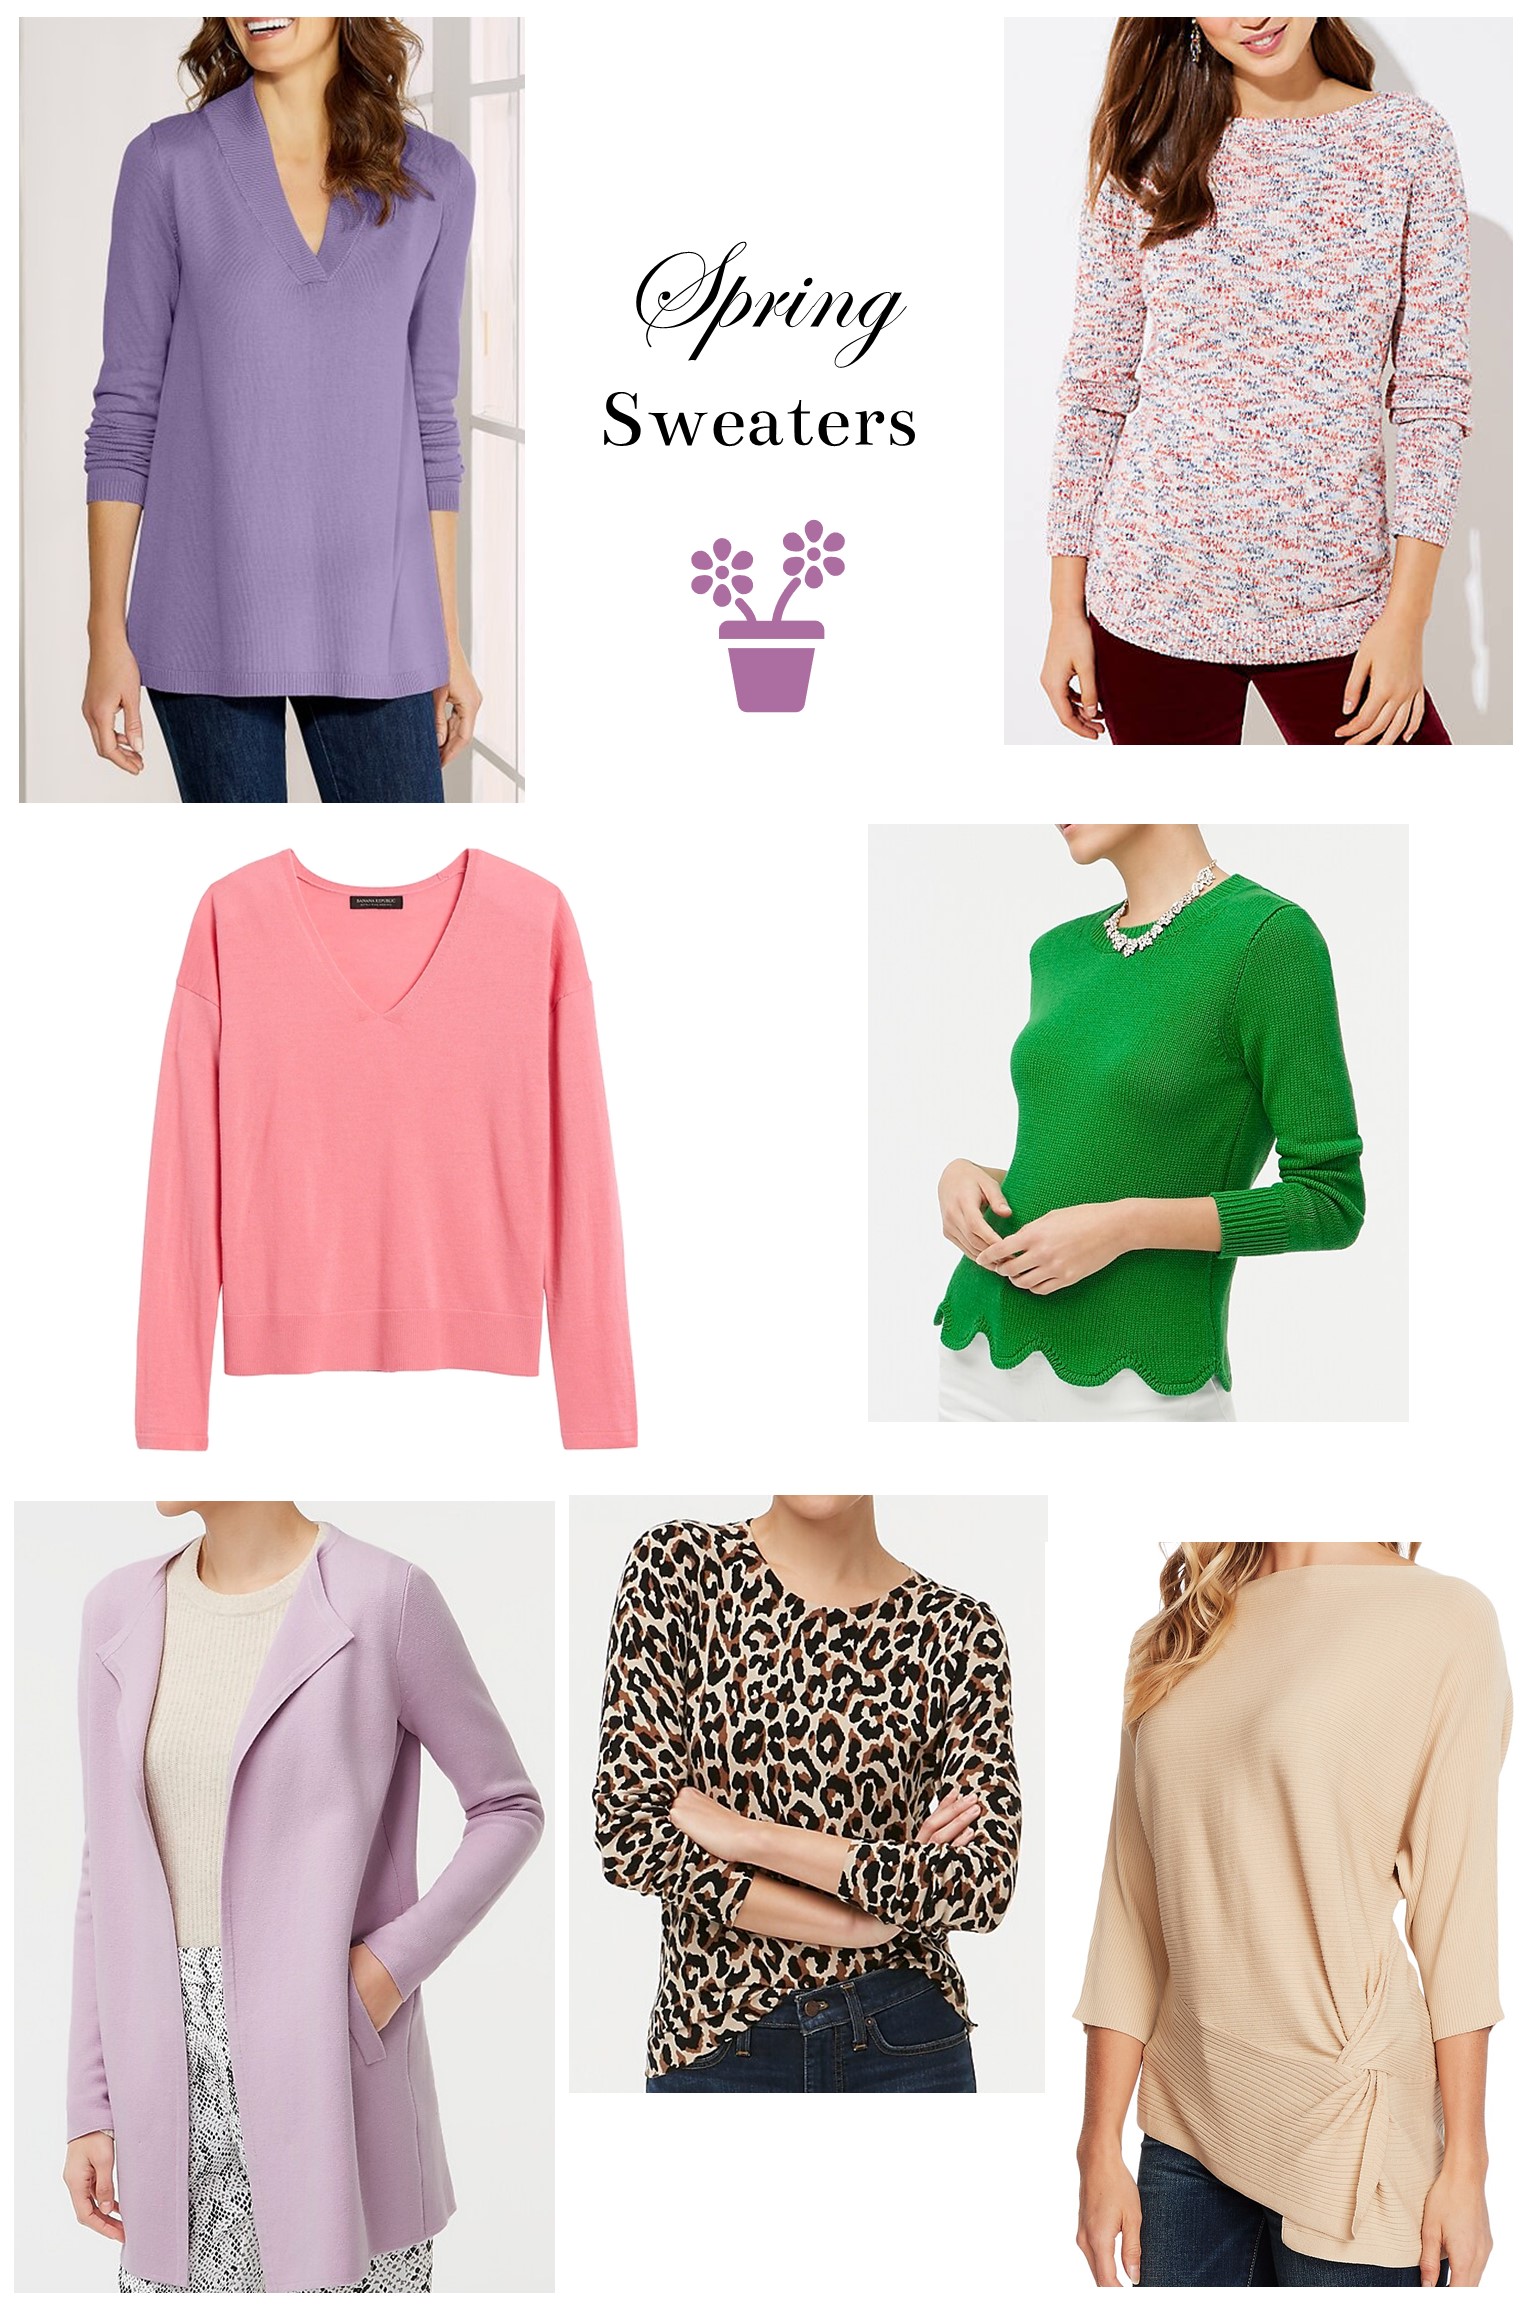 Spring Sweaters